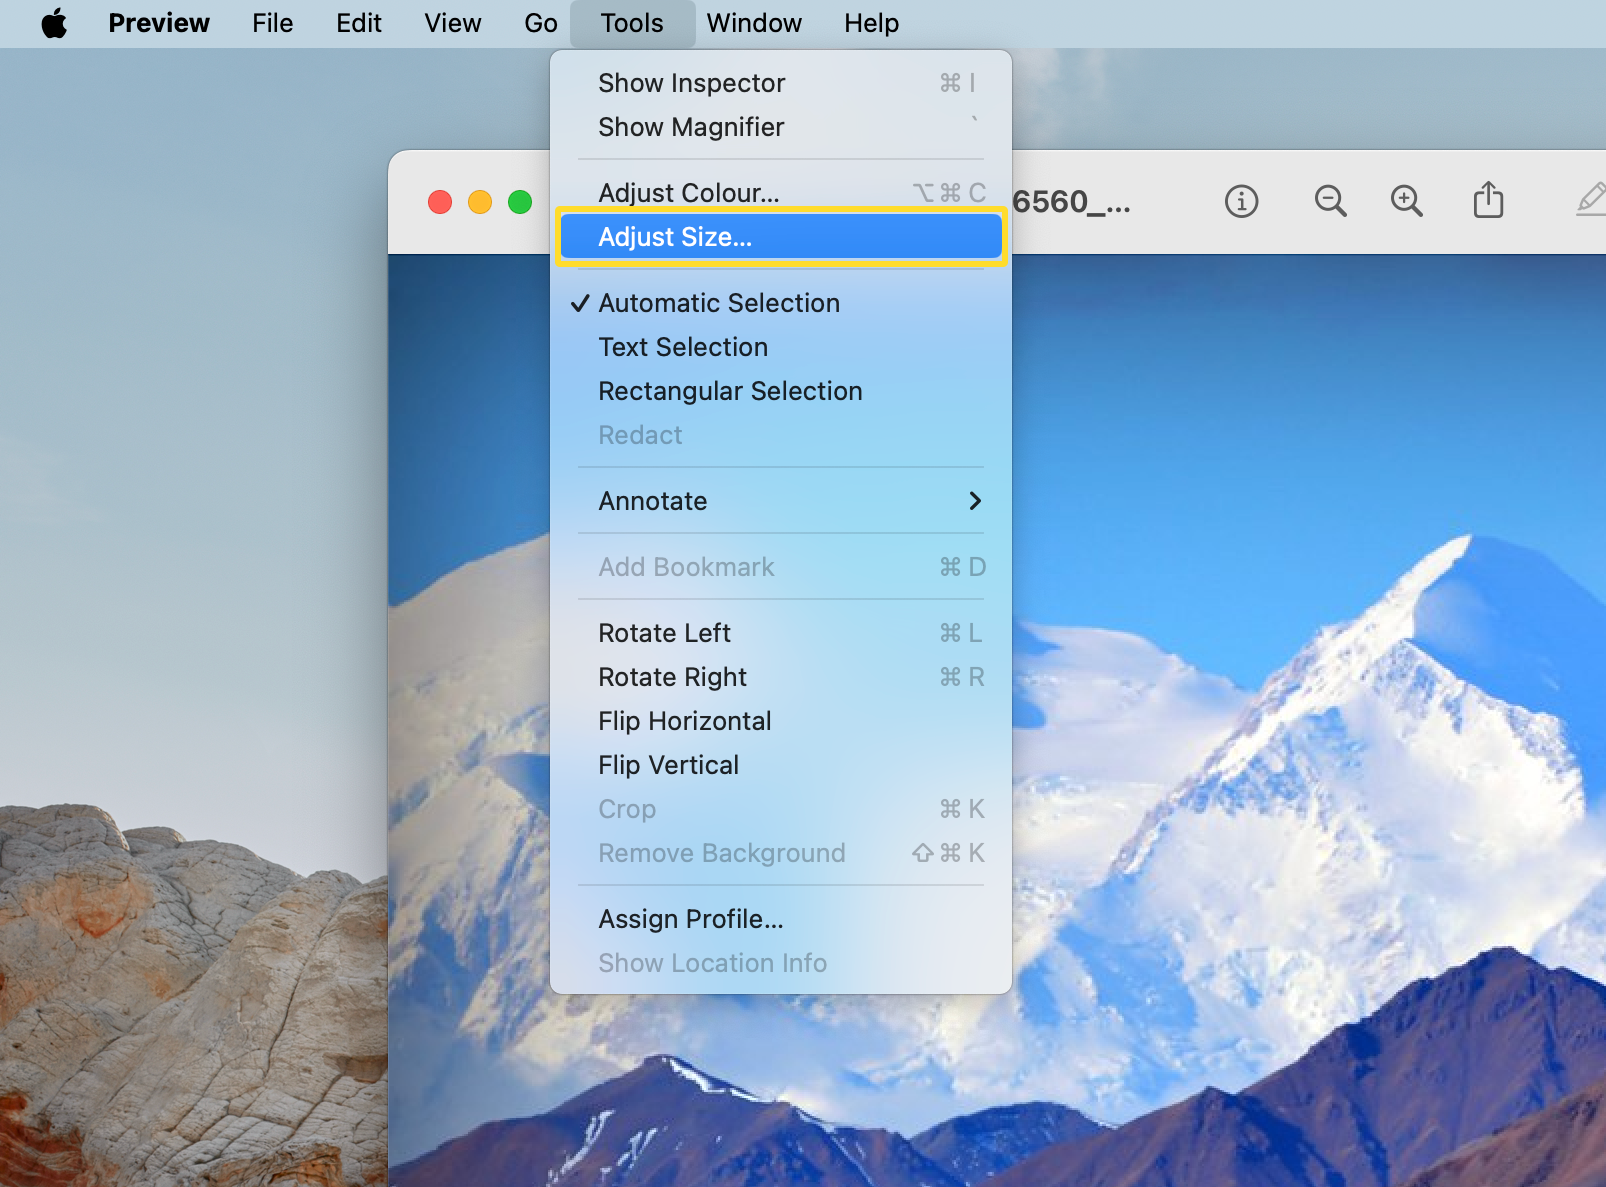 The menu bar of the Preview application and the Tools drop-down menu are demonstrated